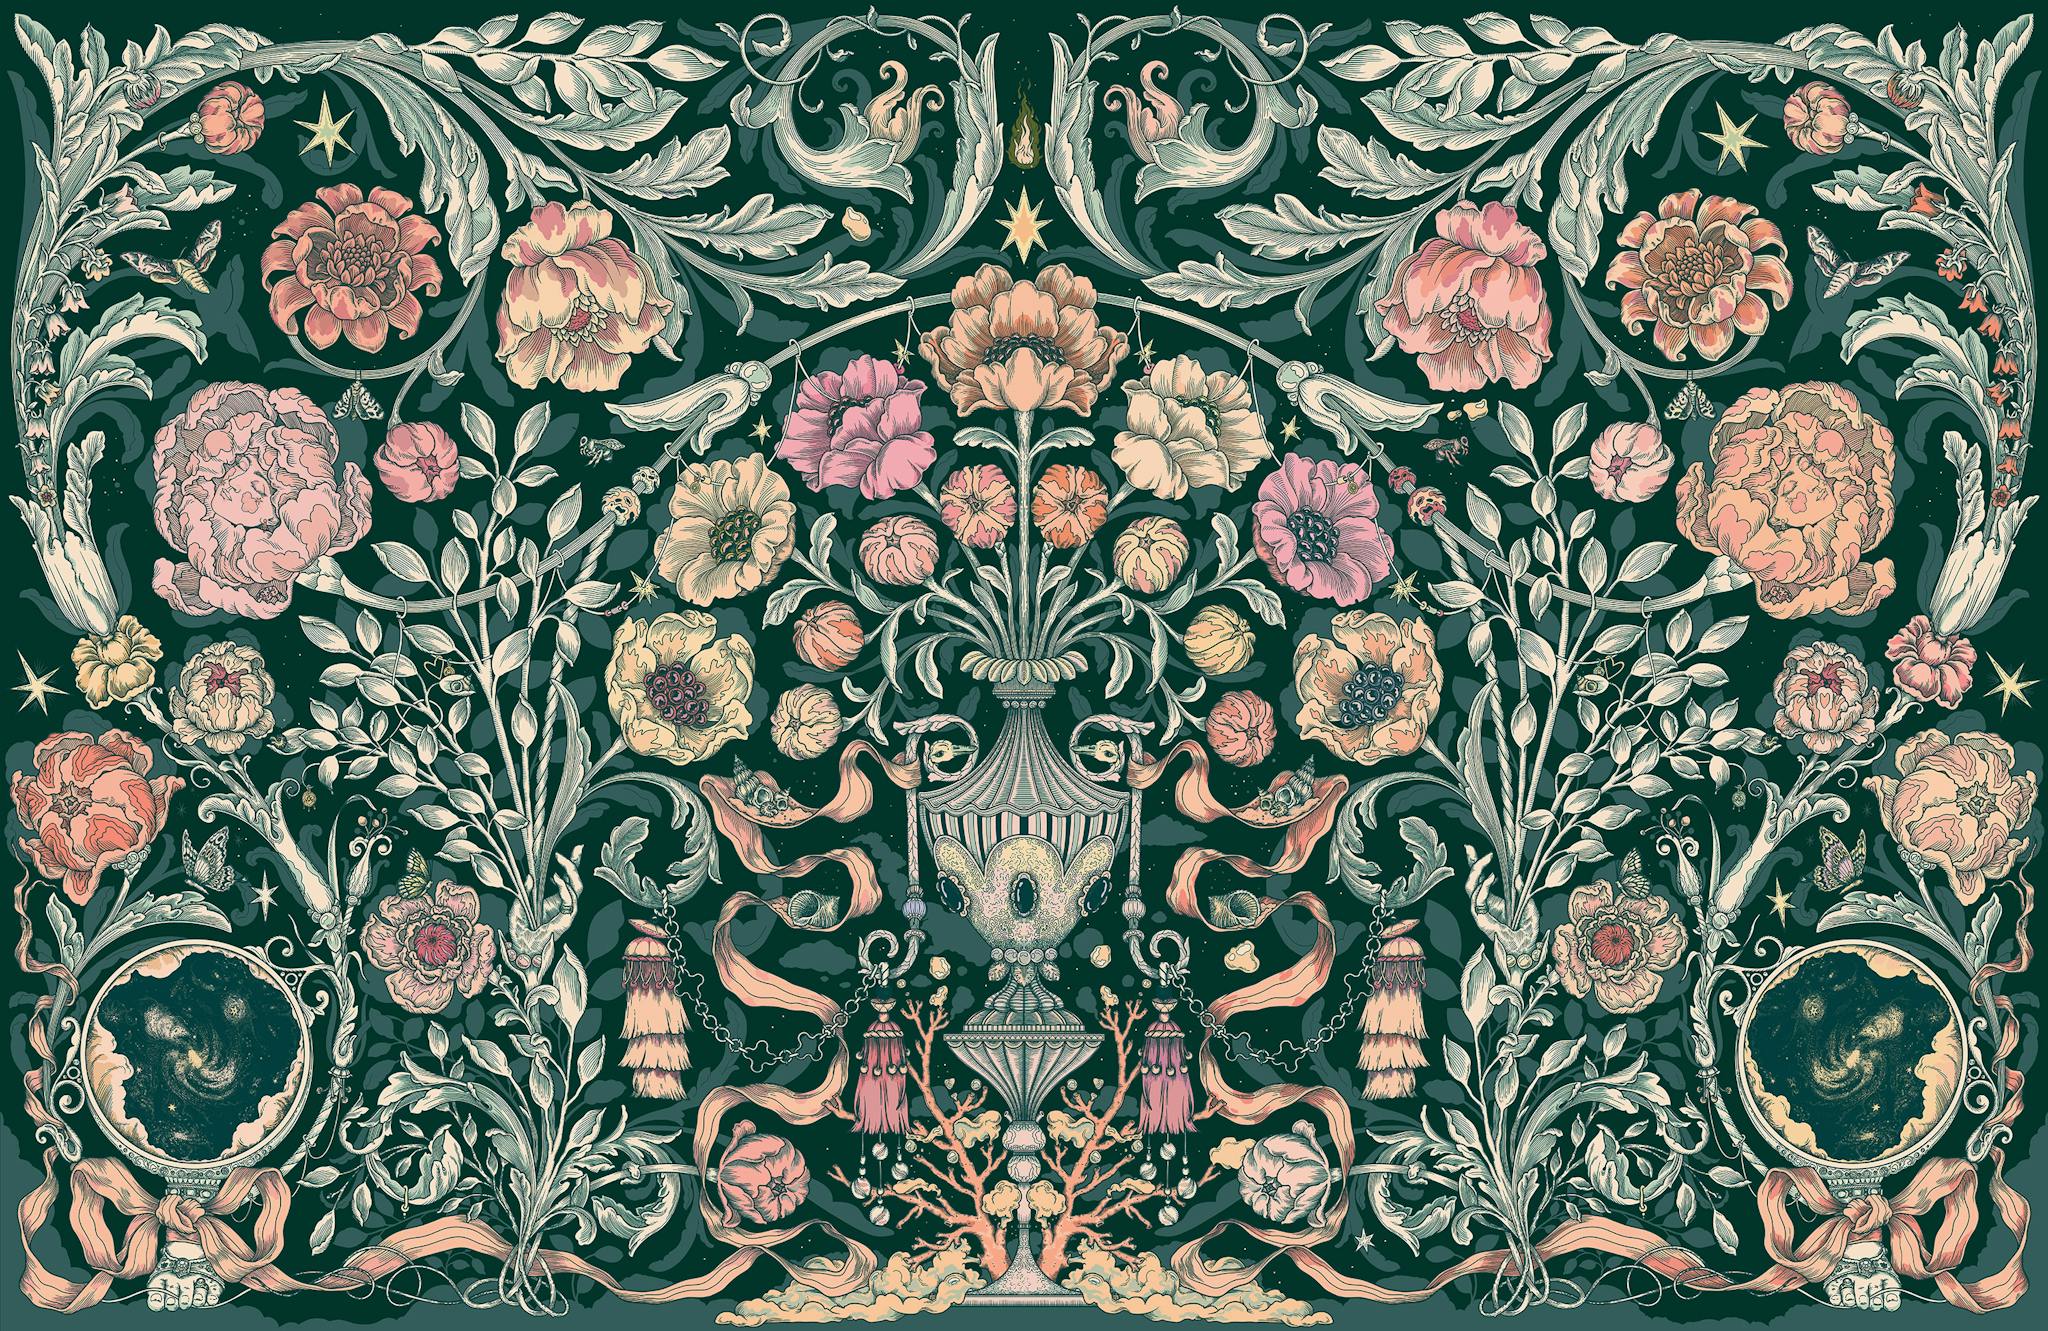 "le jardin merveilleux" fresco in an intense and deep green with hint of pink and peach flowers